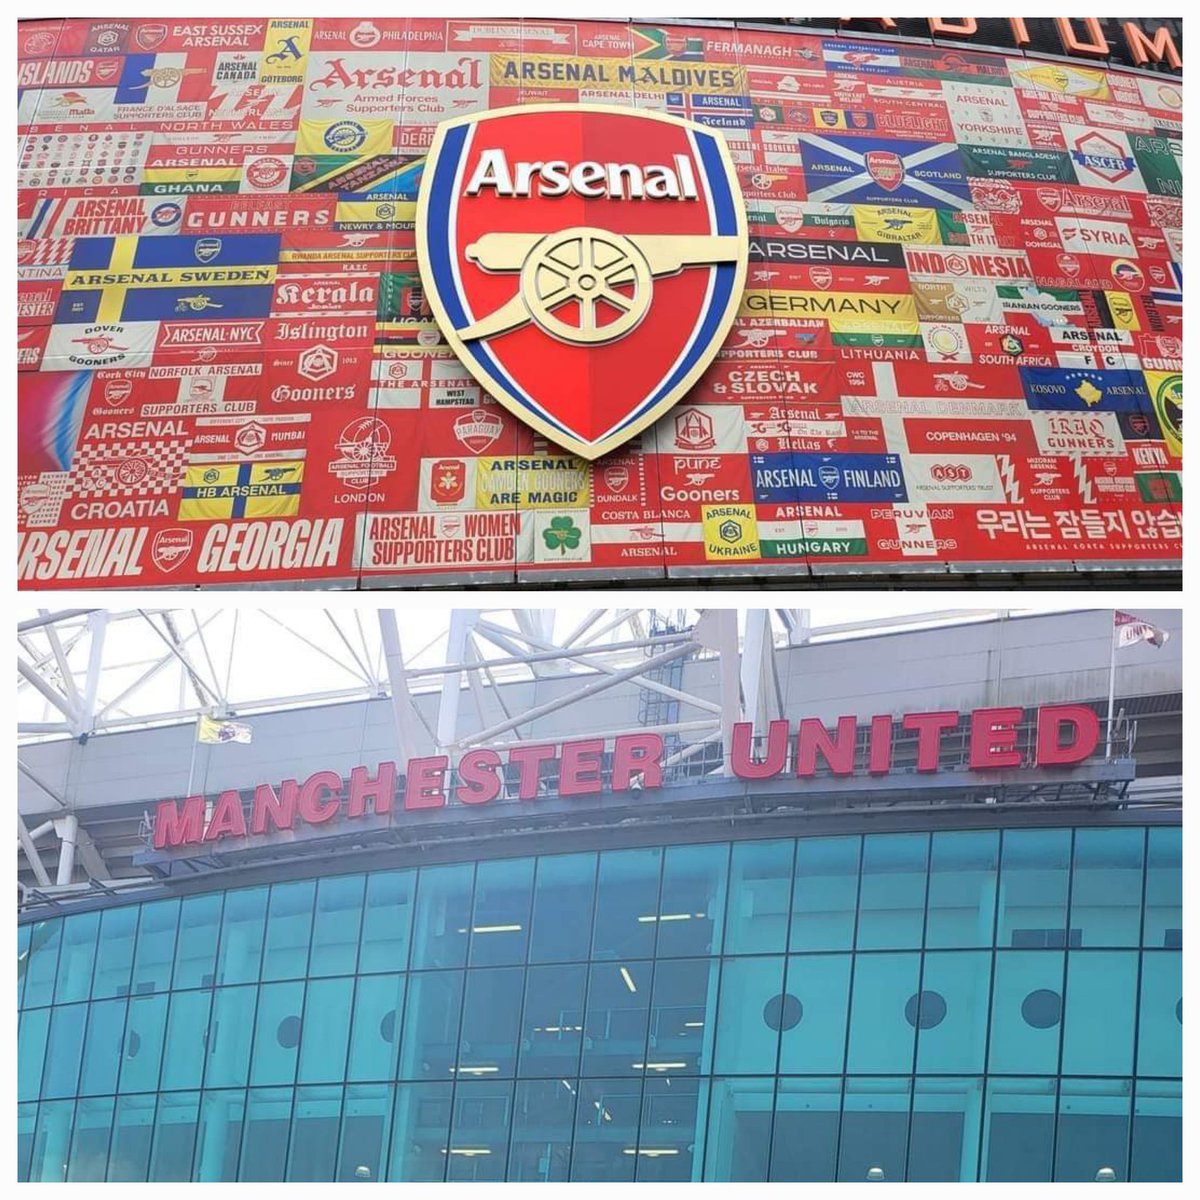 My live experience at both Old Traford on Sunday 12th and Emirates on 4th April.
#arsenal 
#Emiratesstadium
#OldTrafford